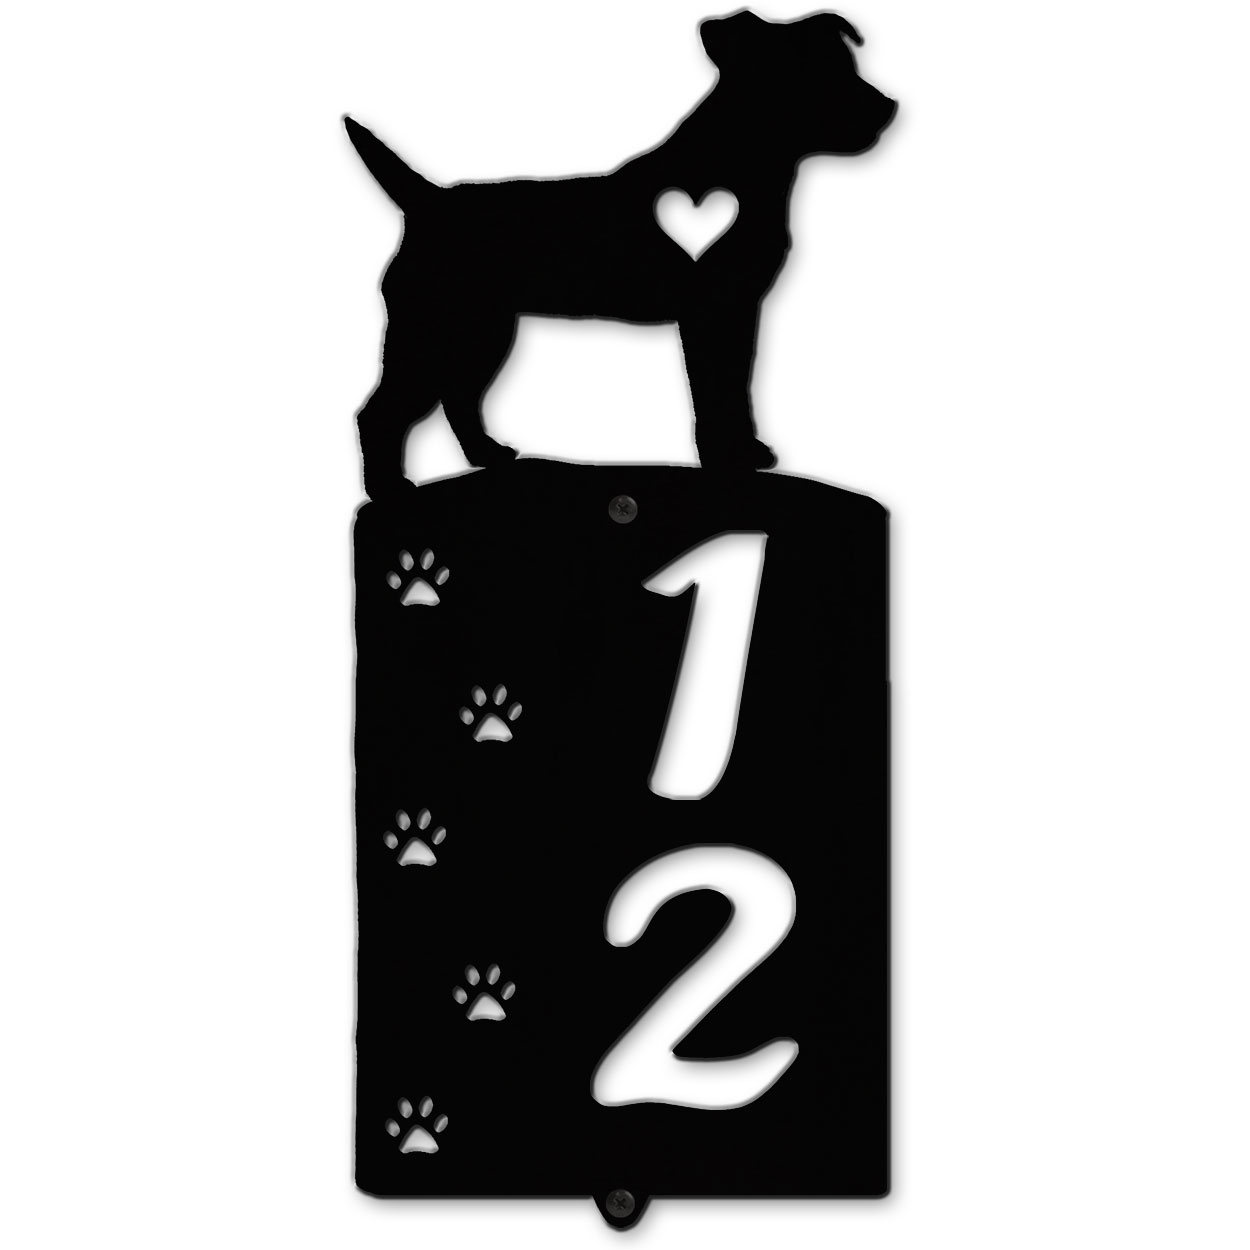 636252 - Jack Russell Cut Outs Two Digit Address Number Plaque